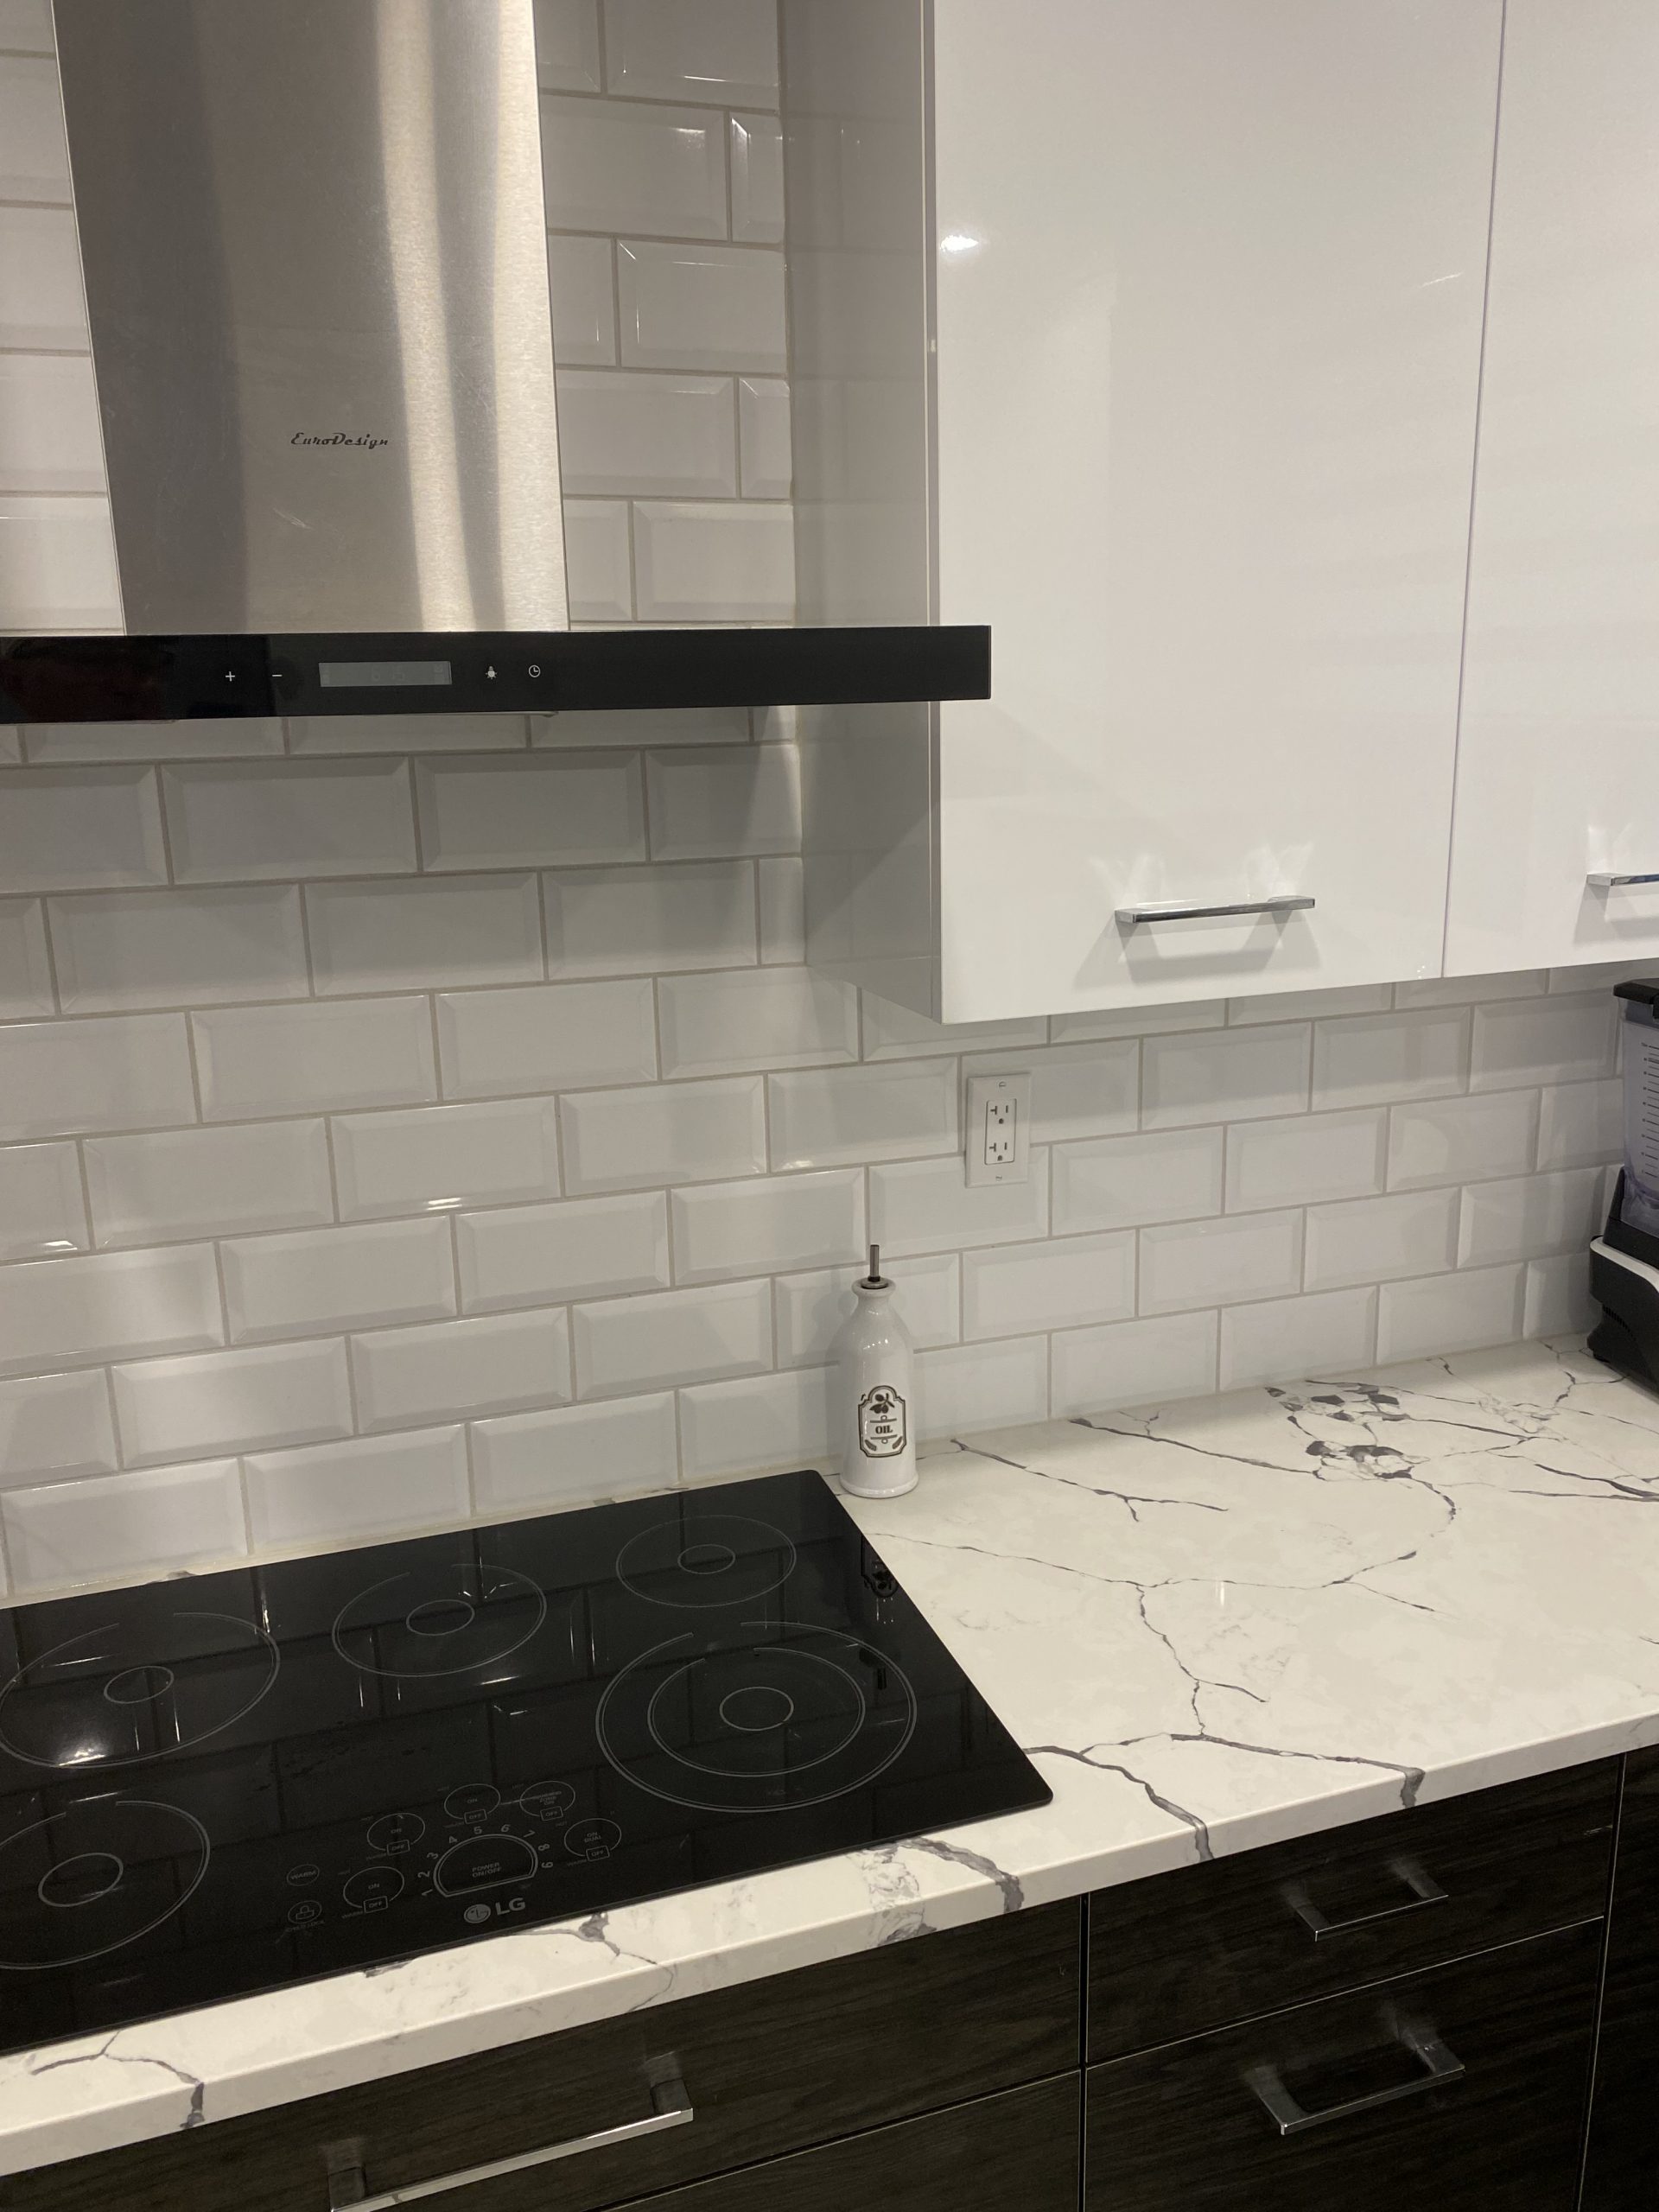 Freshly renovated kitchen Counter